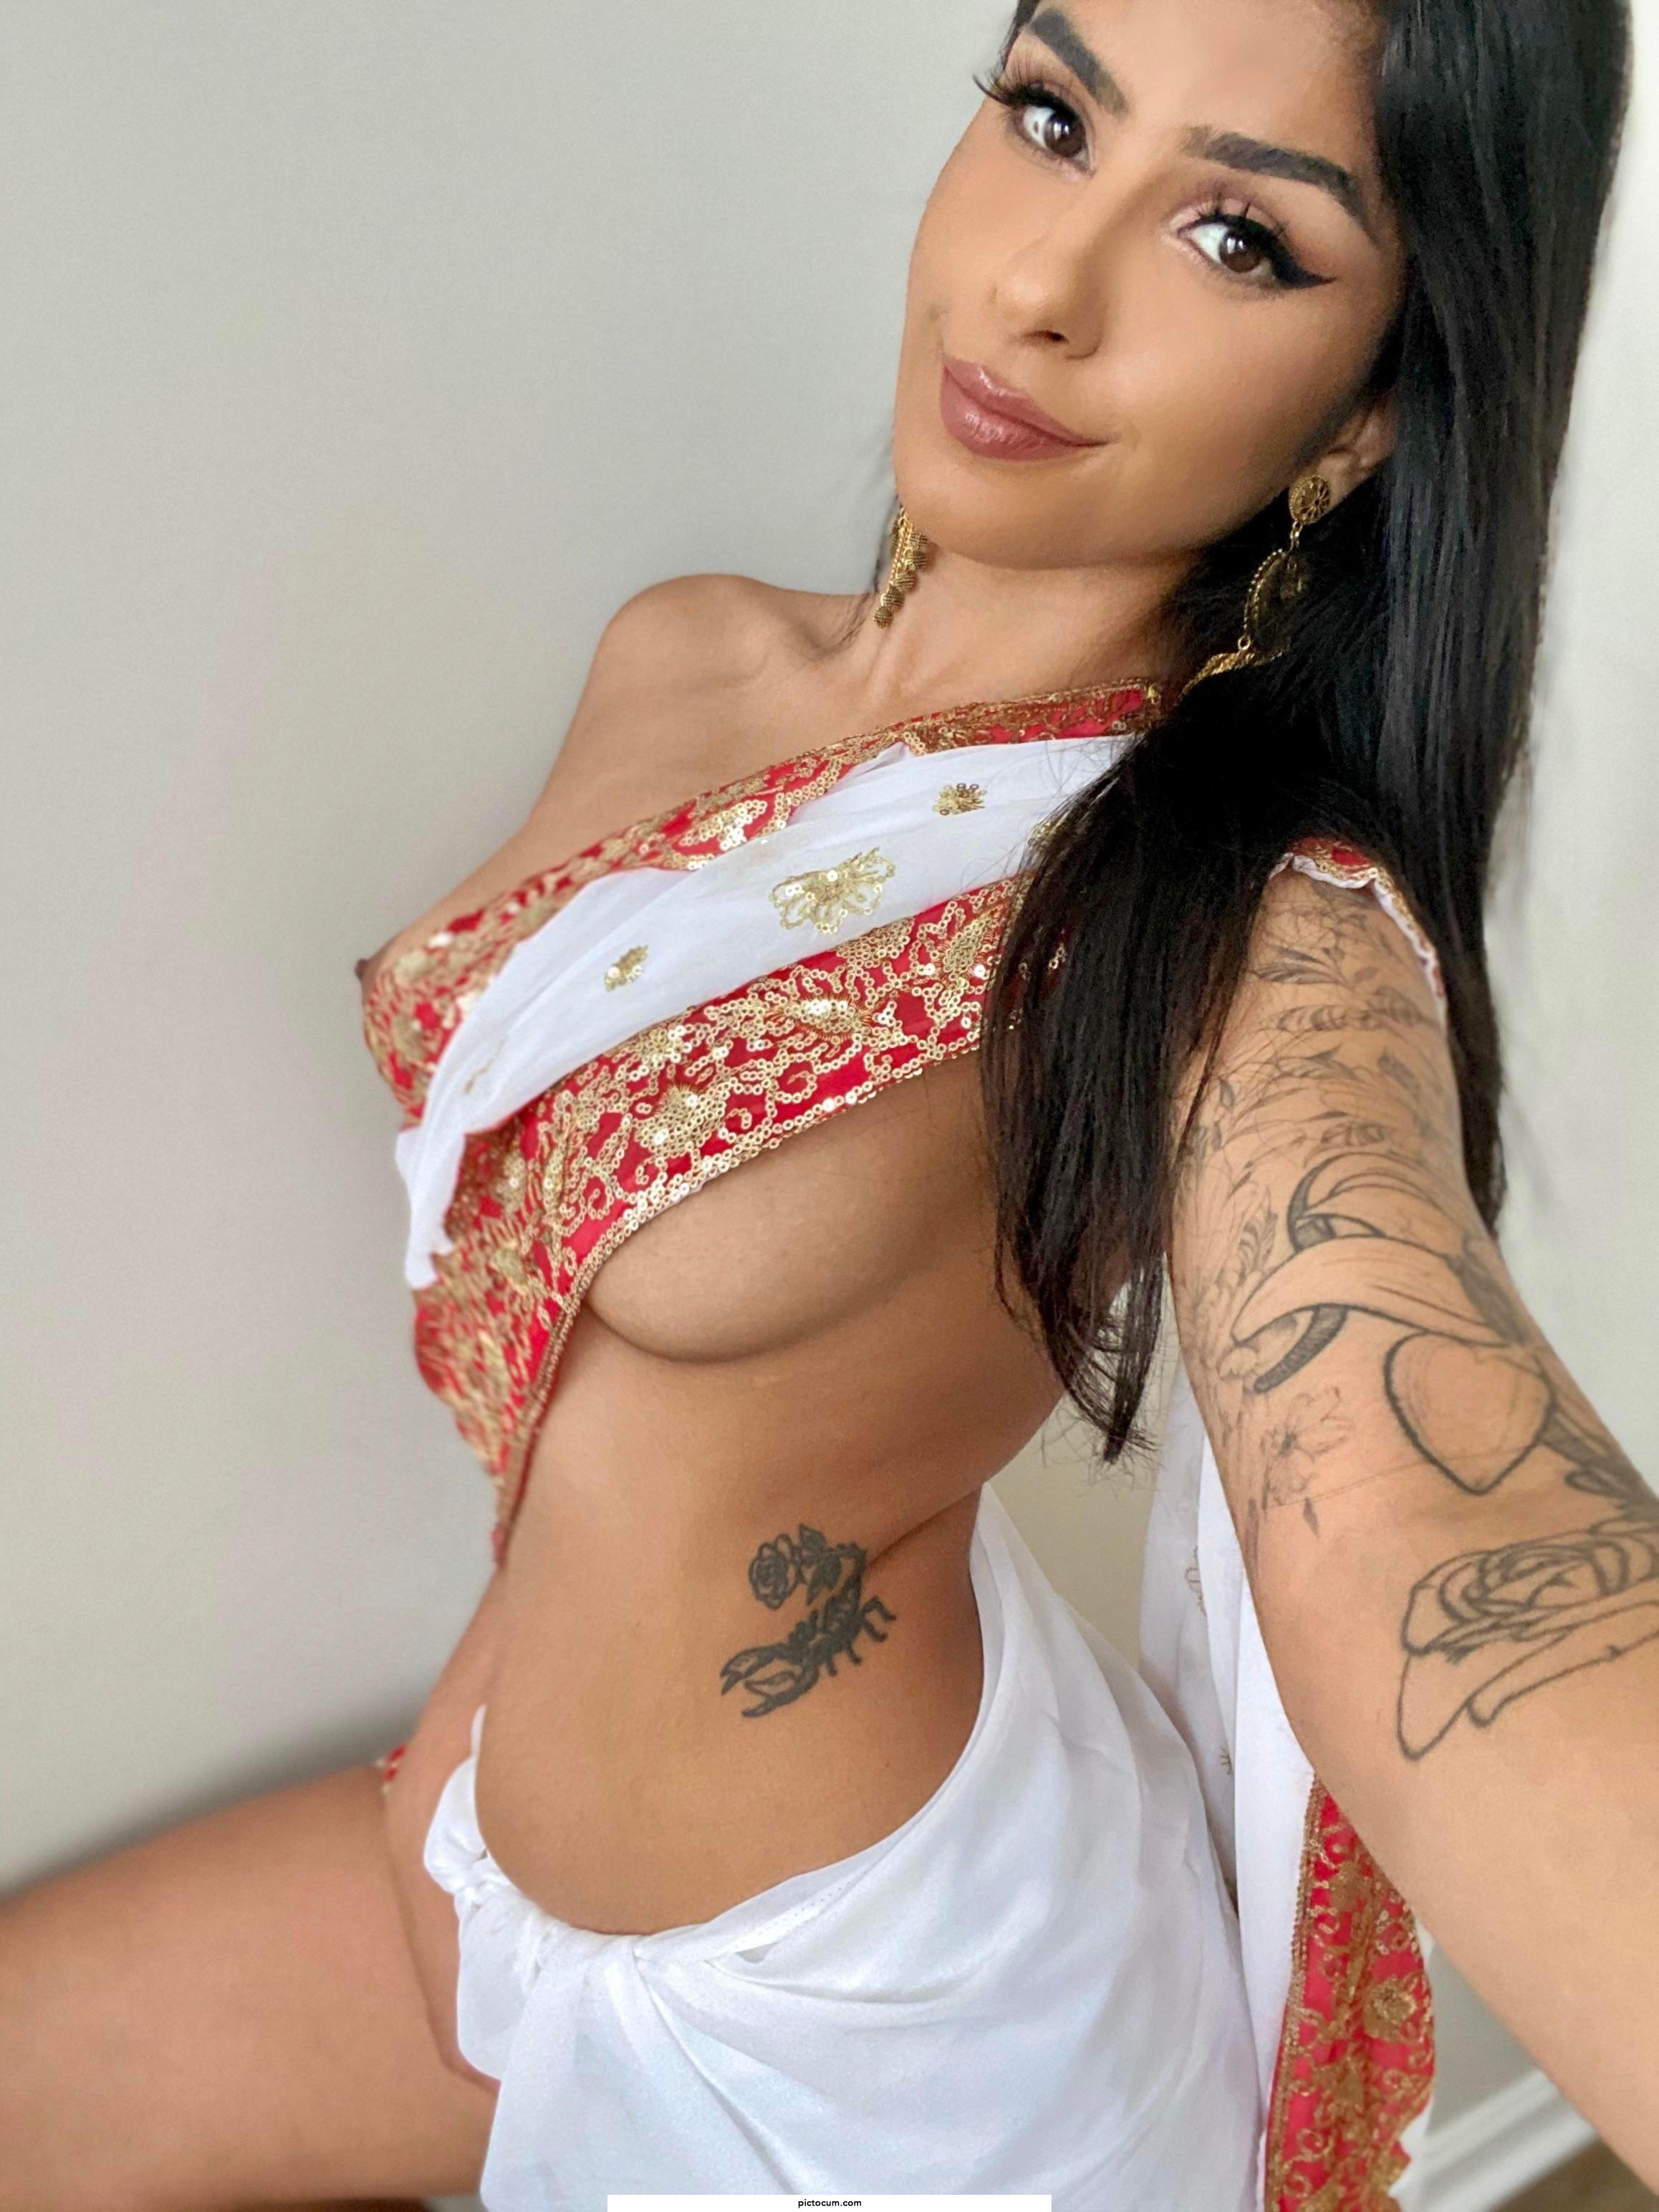 May I interest you in some Indian? 😼❤️🇮🇳